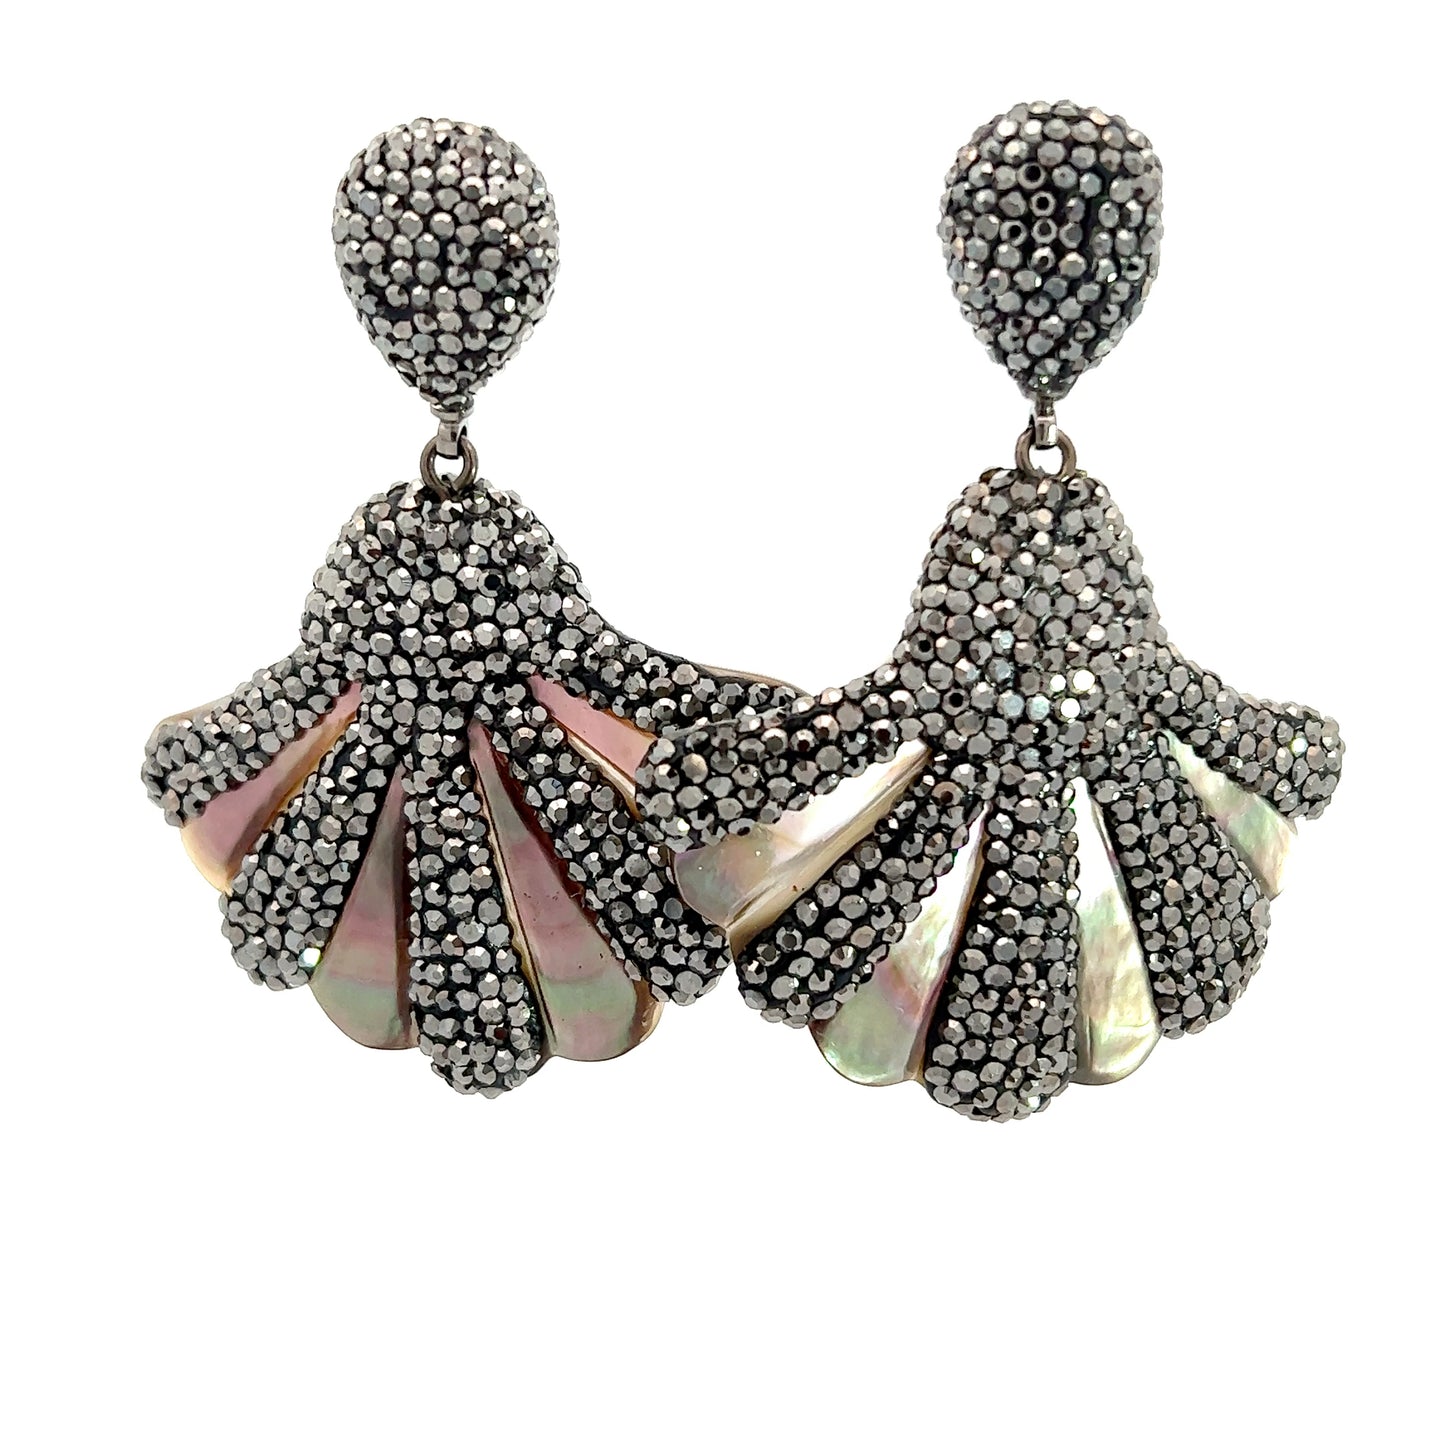 Seashell Mother Of Pearl Earrings - Born To Glam